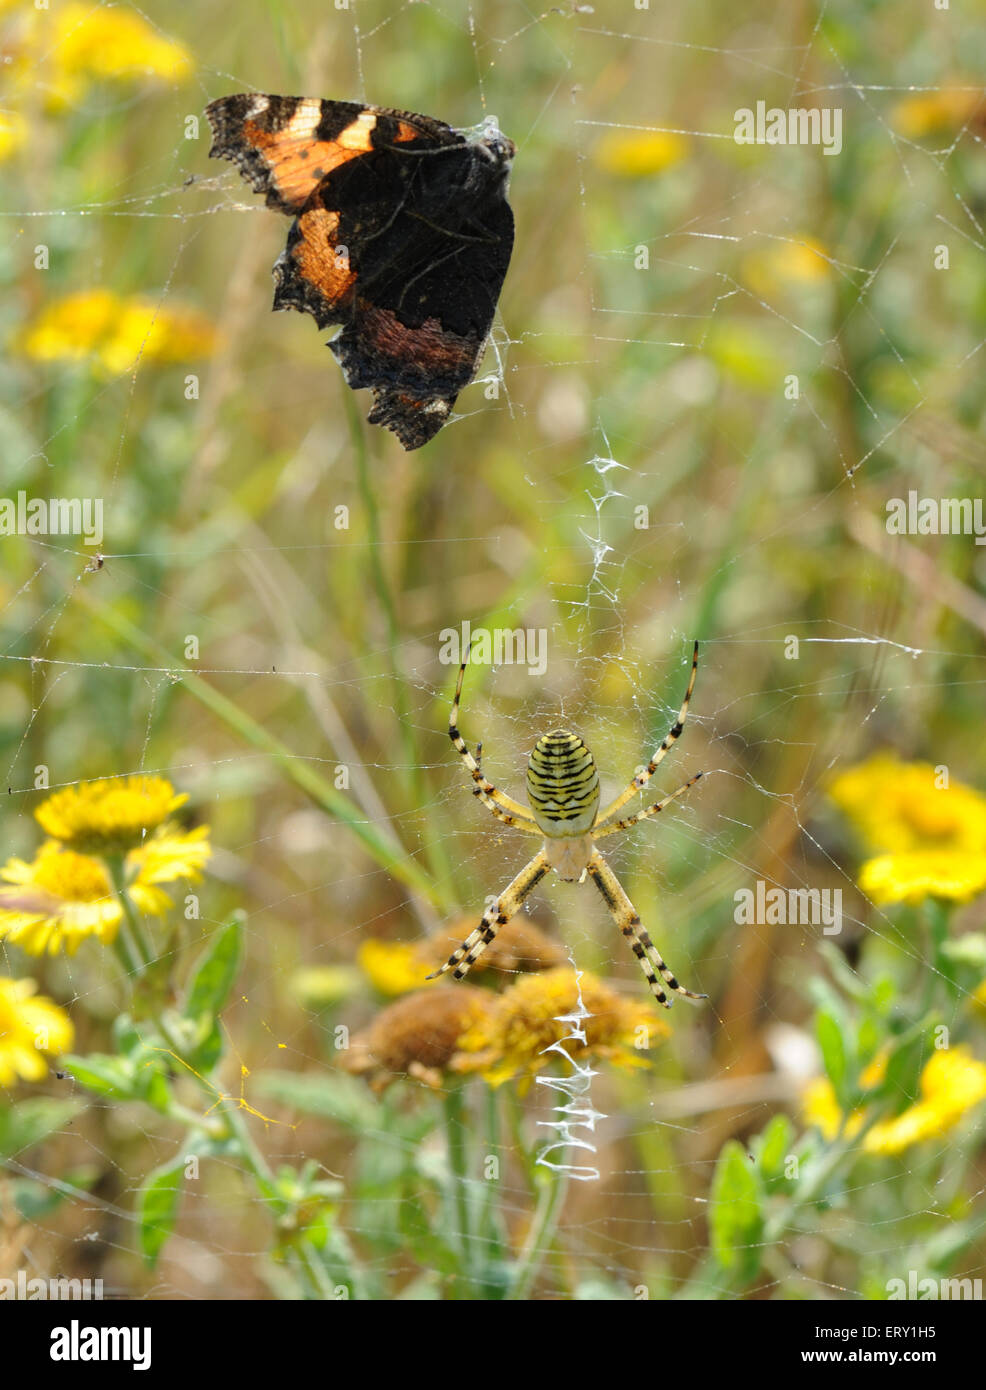 A Wasp Spider (Argiope bruennichi) on its  web with a zigzag pattern slung between grass stems on a south facing bank. Stock Photo